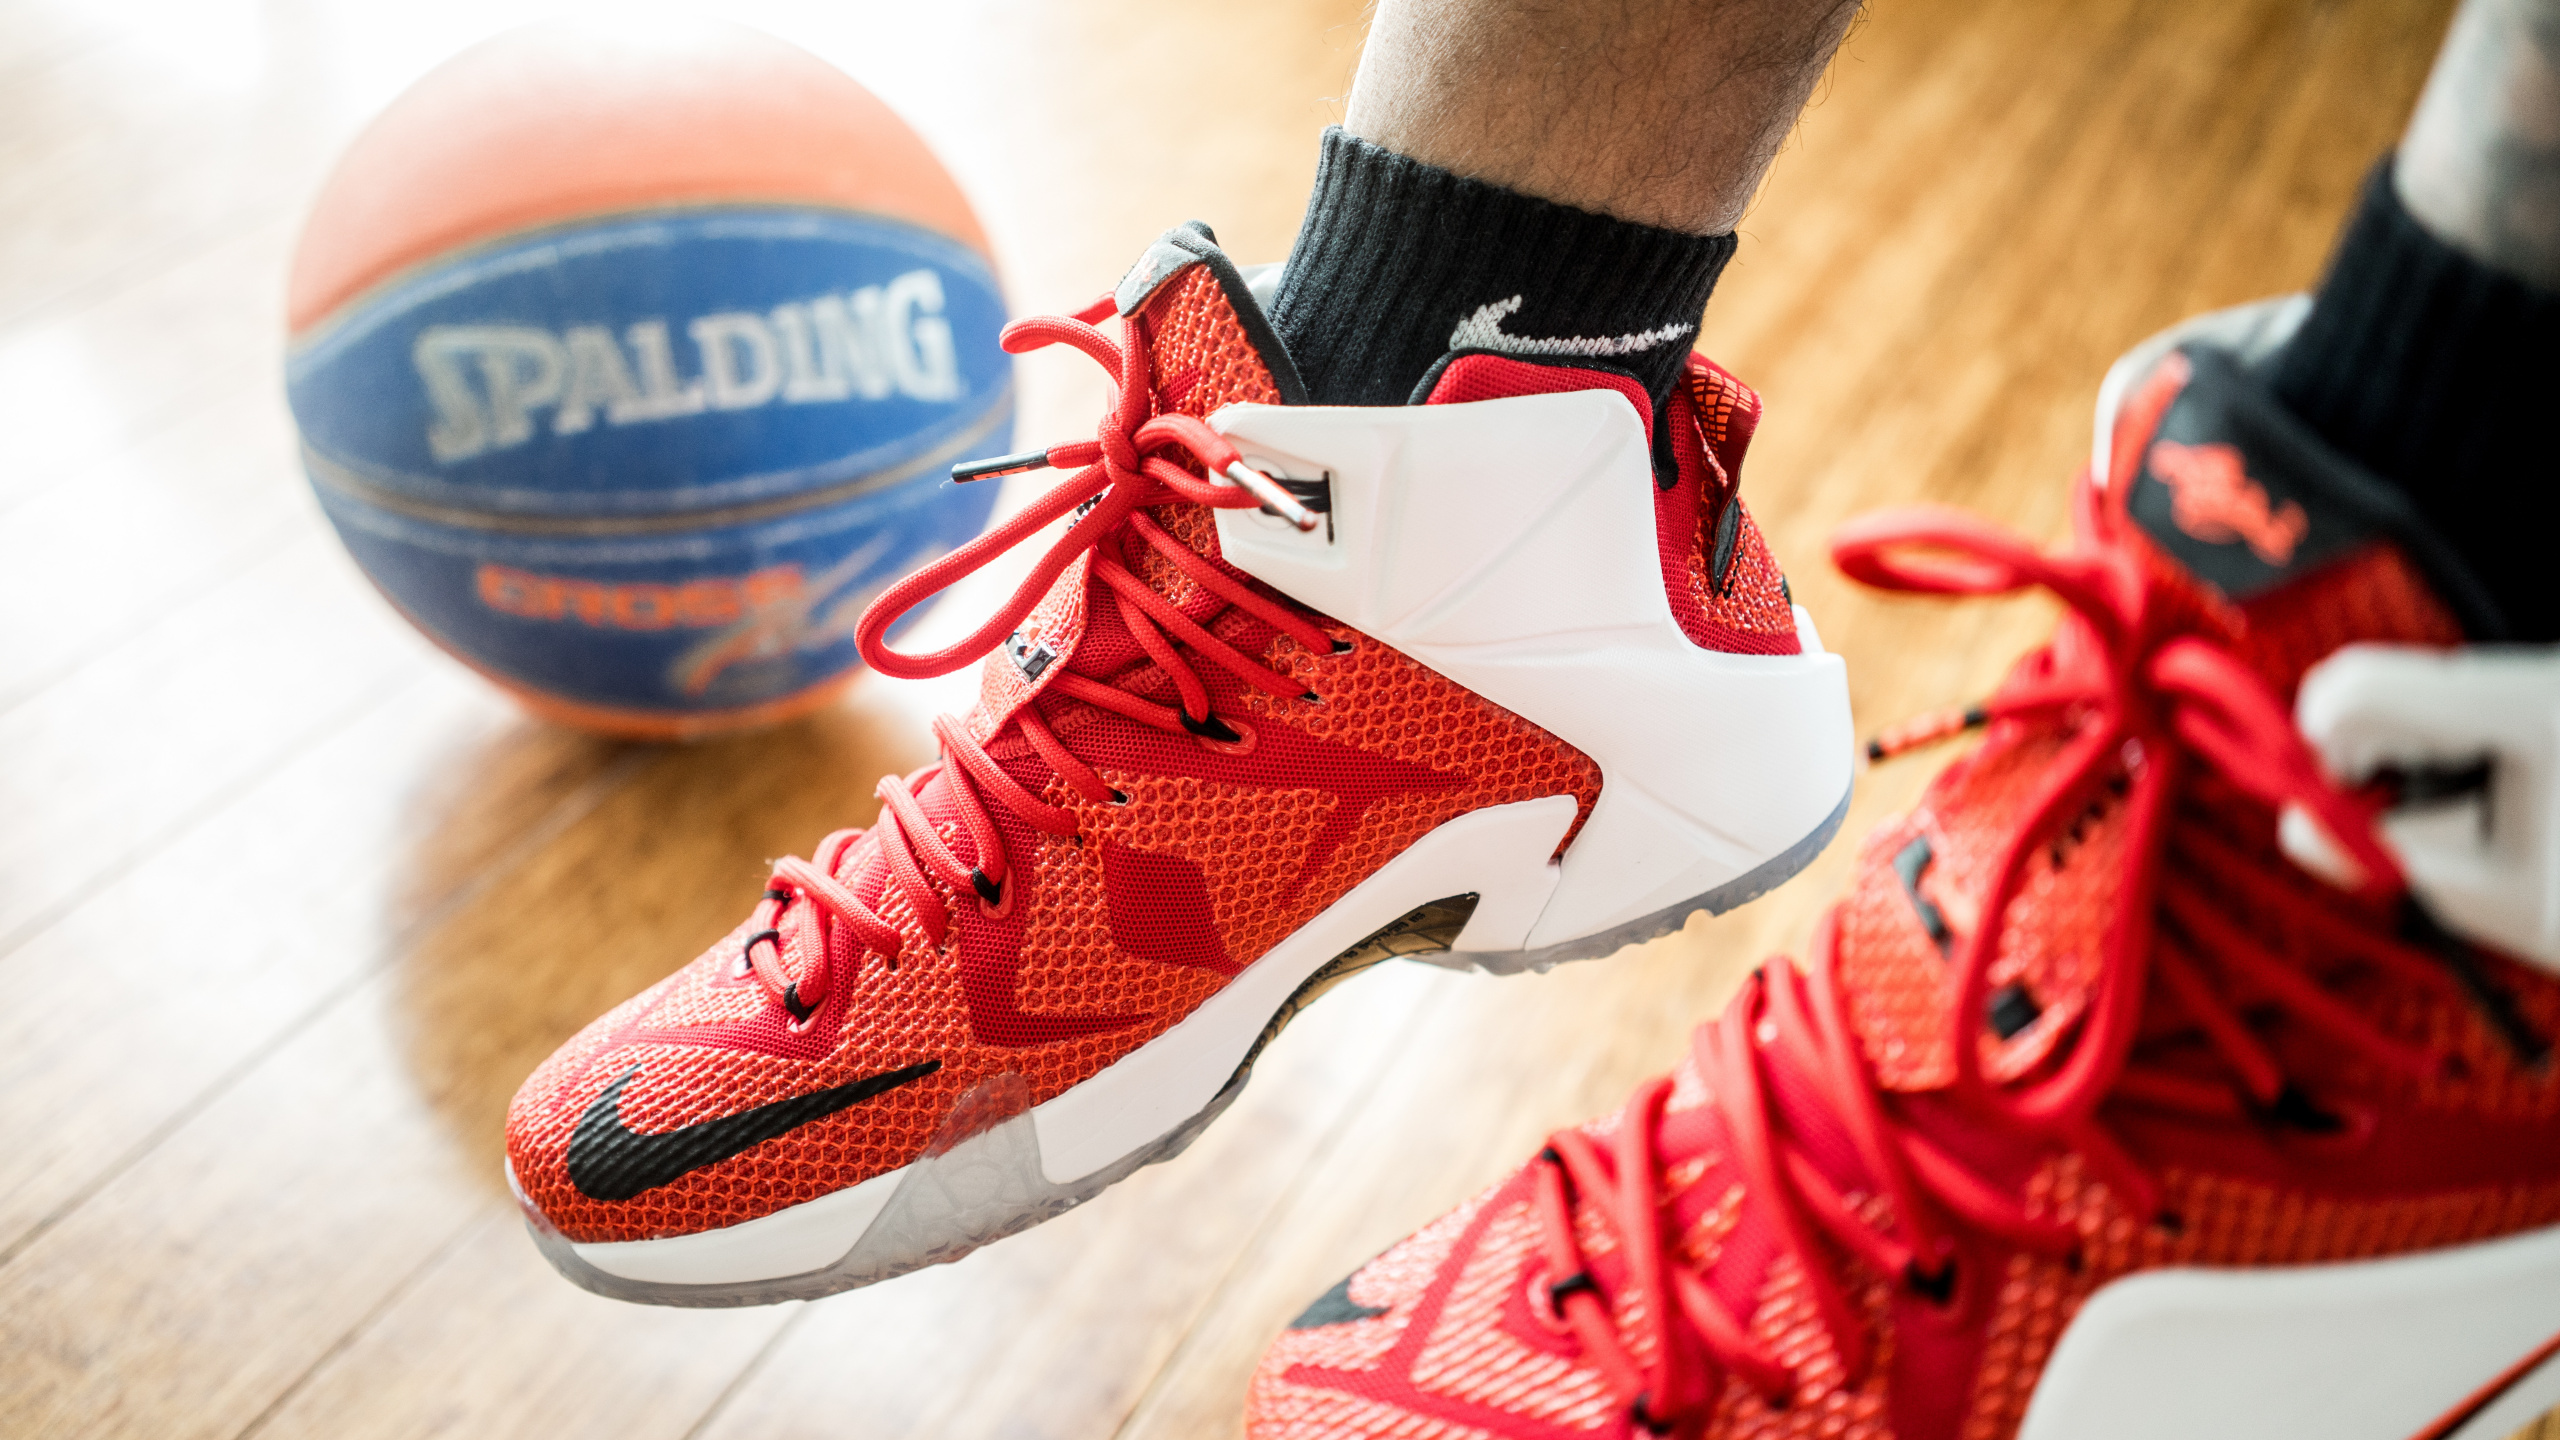 Person Wearing Red Nike Basketball Shoes. Wallpaper in 2560x1440 Resolution